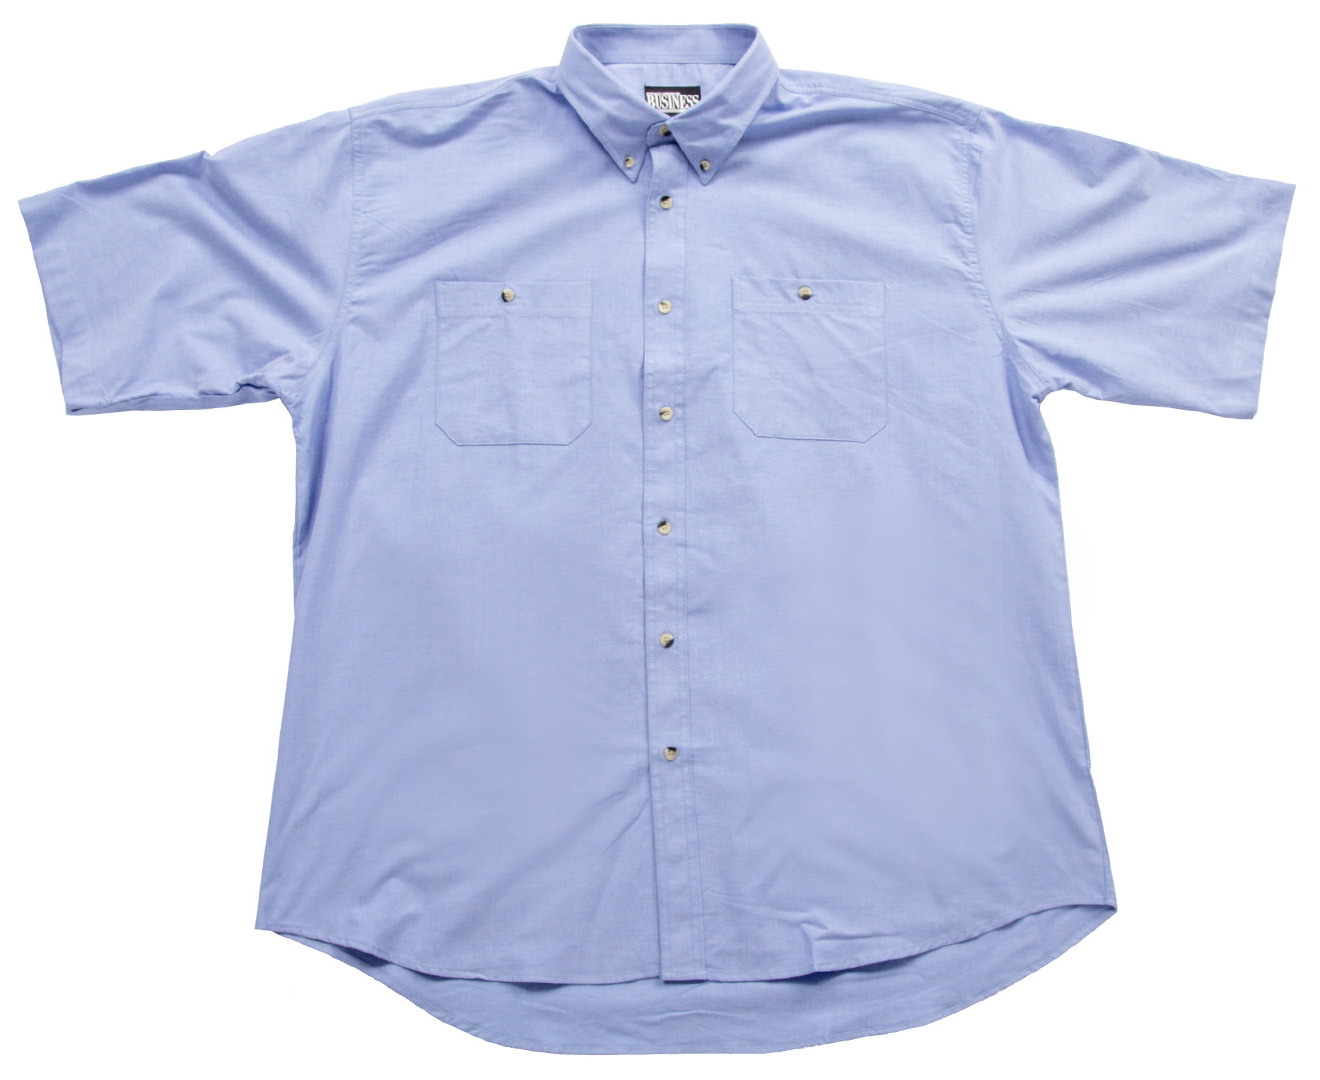 Totally Corporate Men's Short Sleeve Double Pocket Shirt - Blue | Catch ...